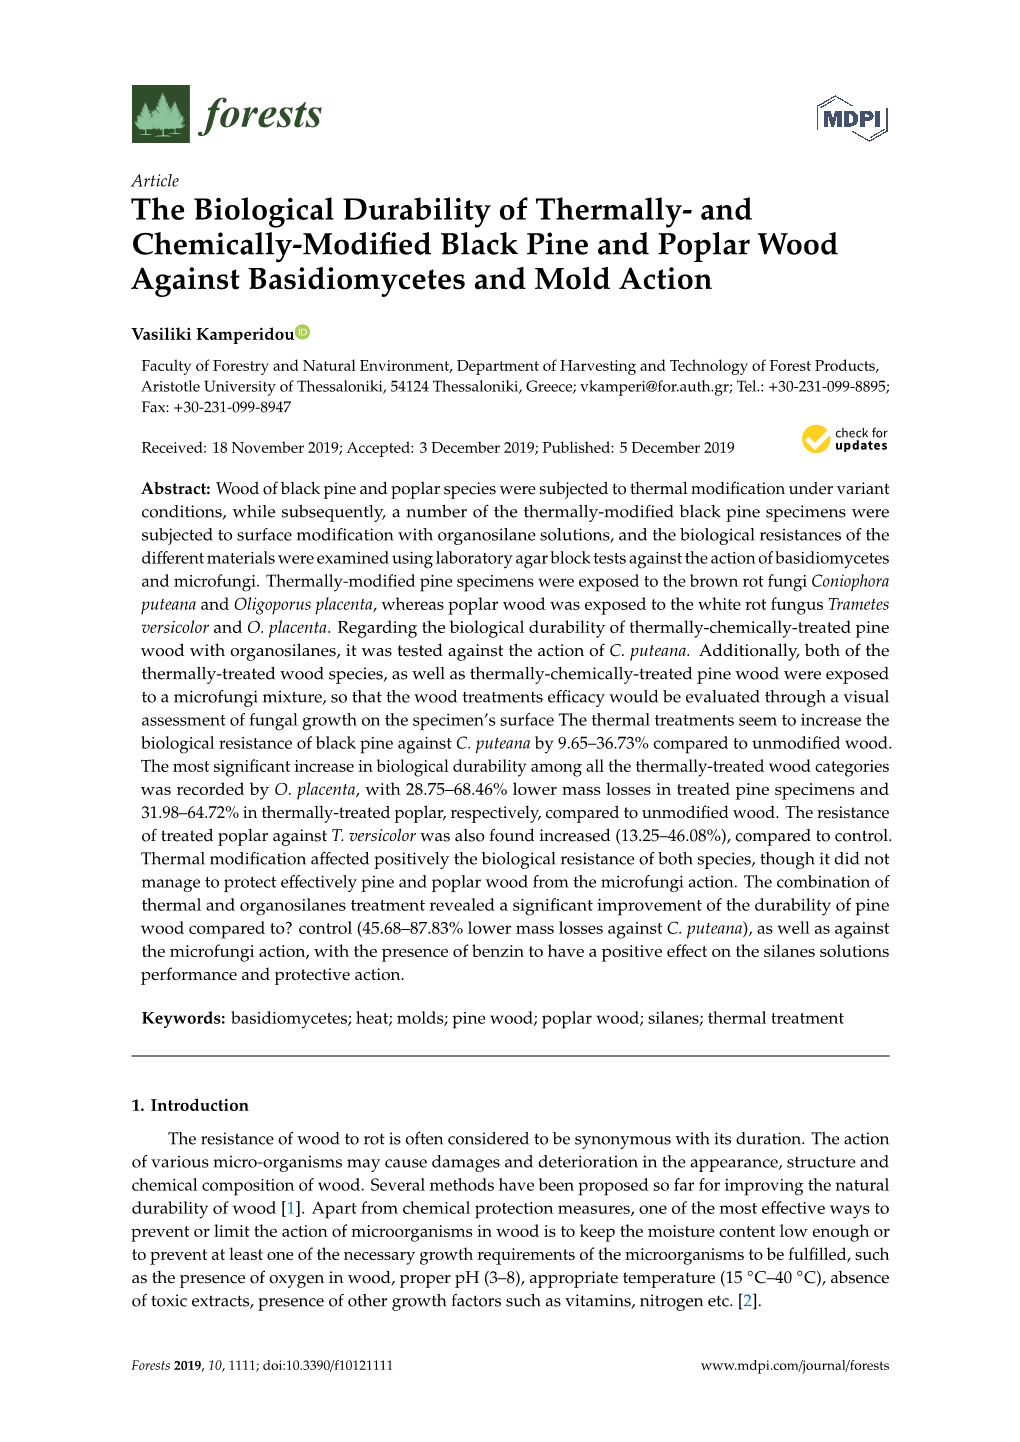 The Biological Durability of Thermally- and Chemically-Modiﬁed Black Pine and Poplar Wood Against Basidiomycetes and Mold Action